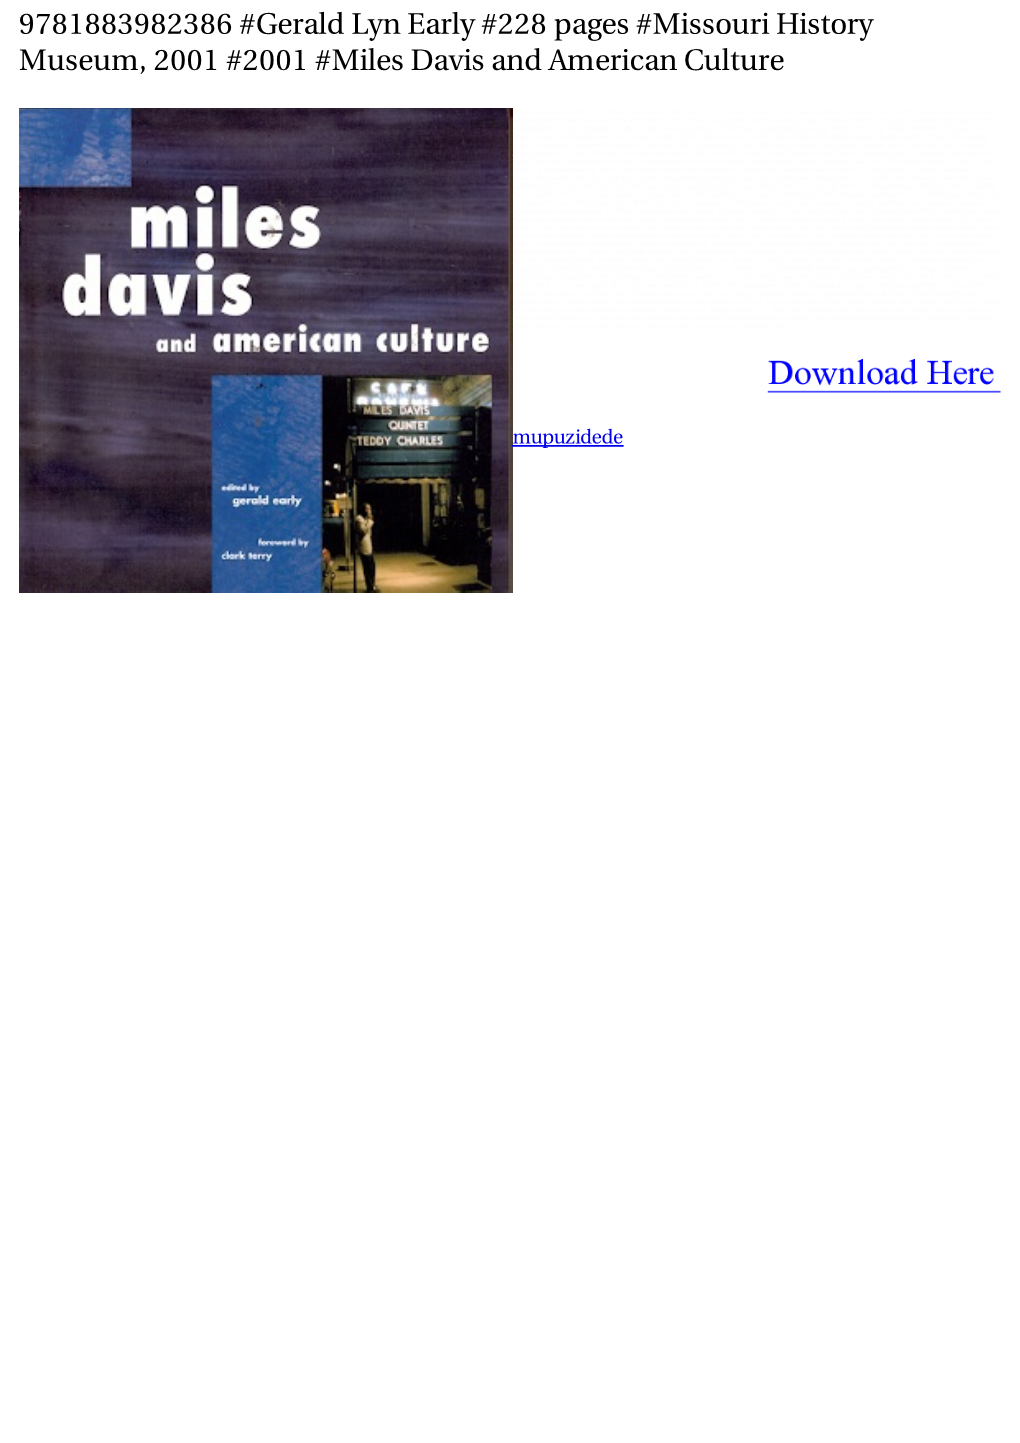 9781883982386 #Gerald Lyn Early #228 Pages #Missouri History Museum, 2001 #2001 #Miles Davis and American Culture